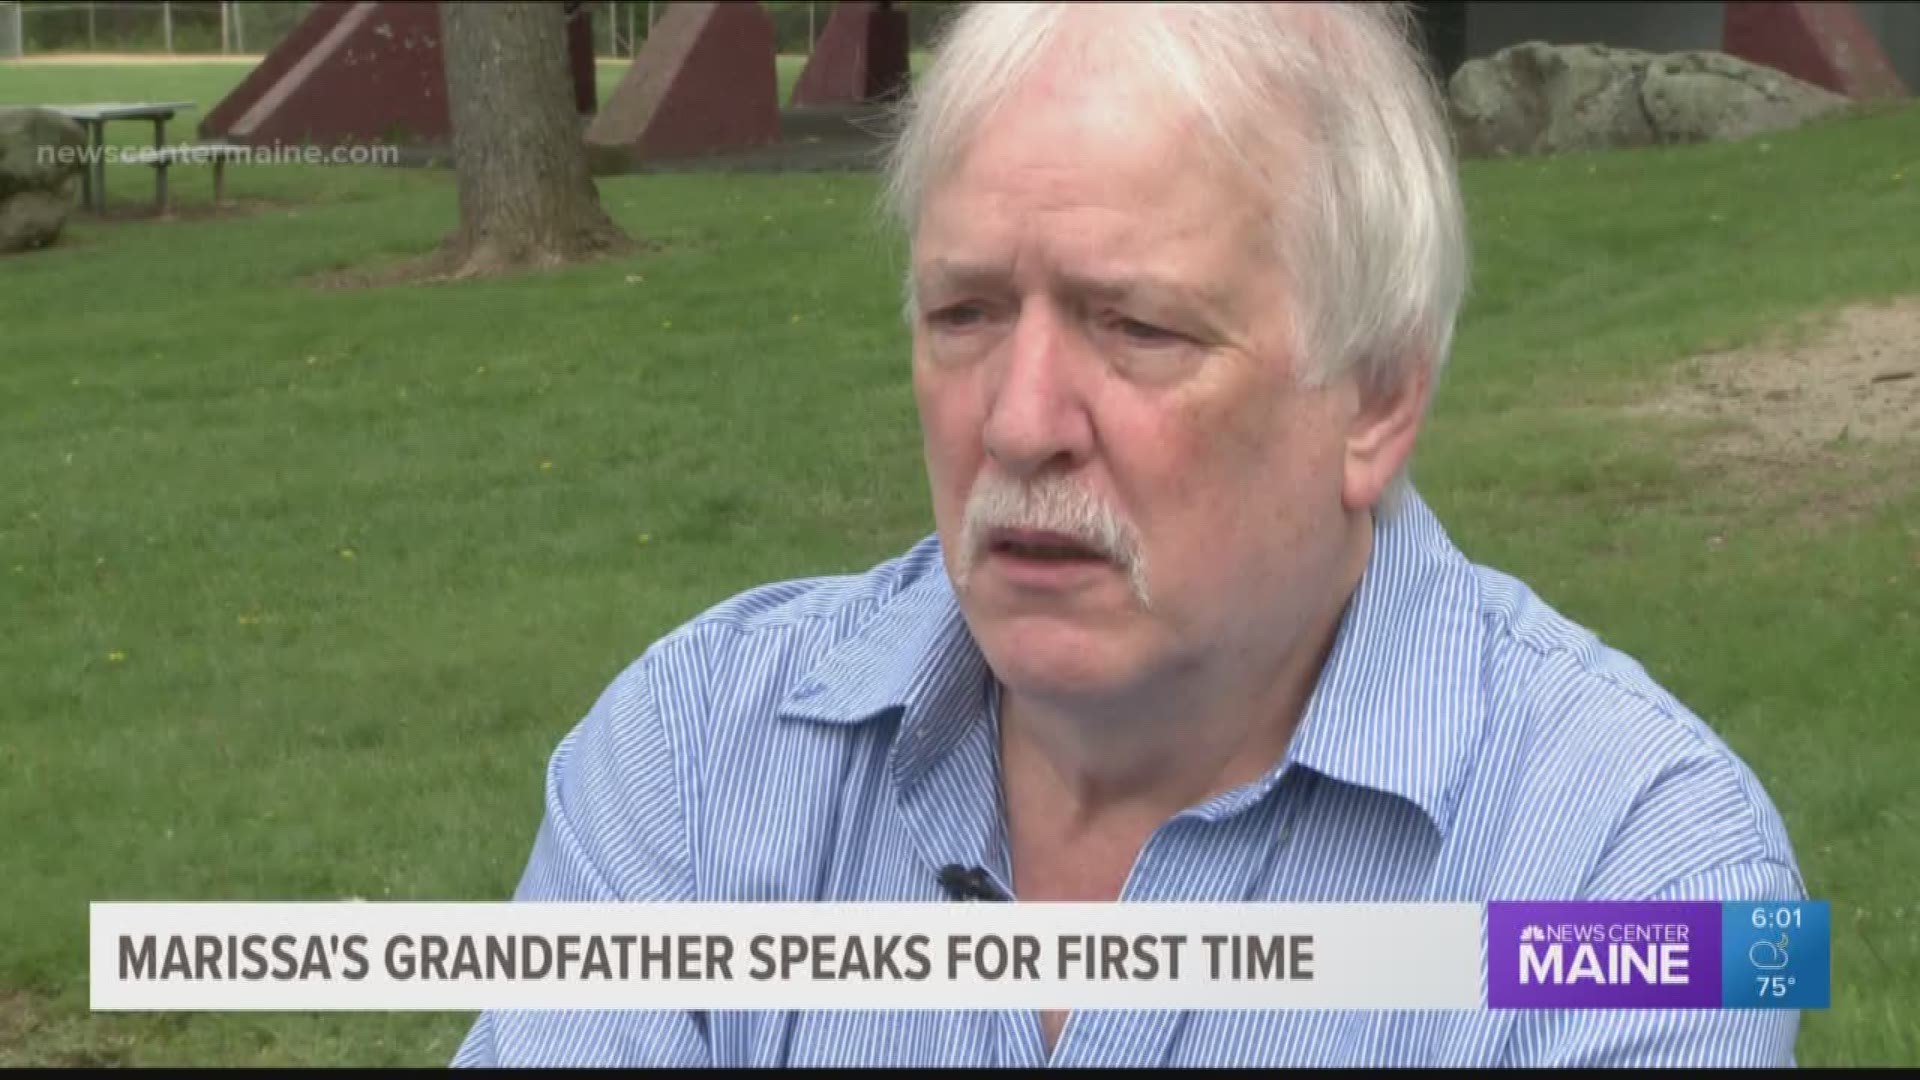 Marissa's grandfather speaks for first time 